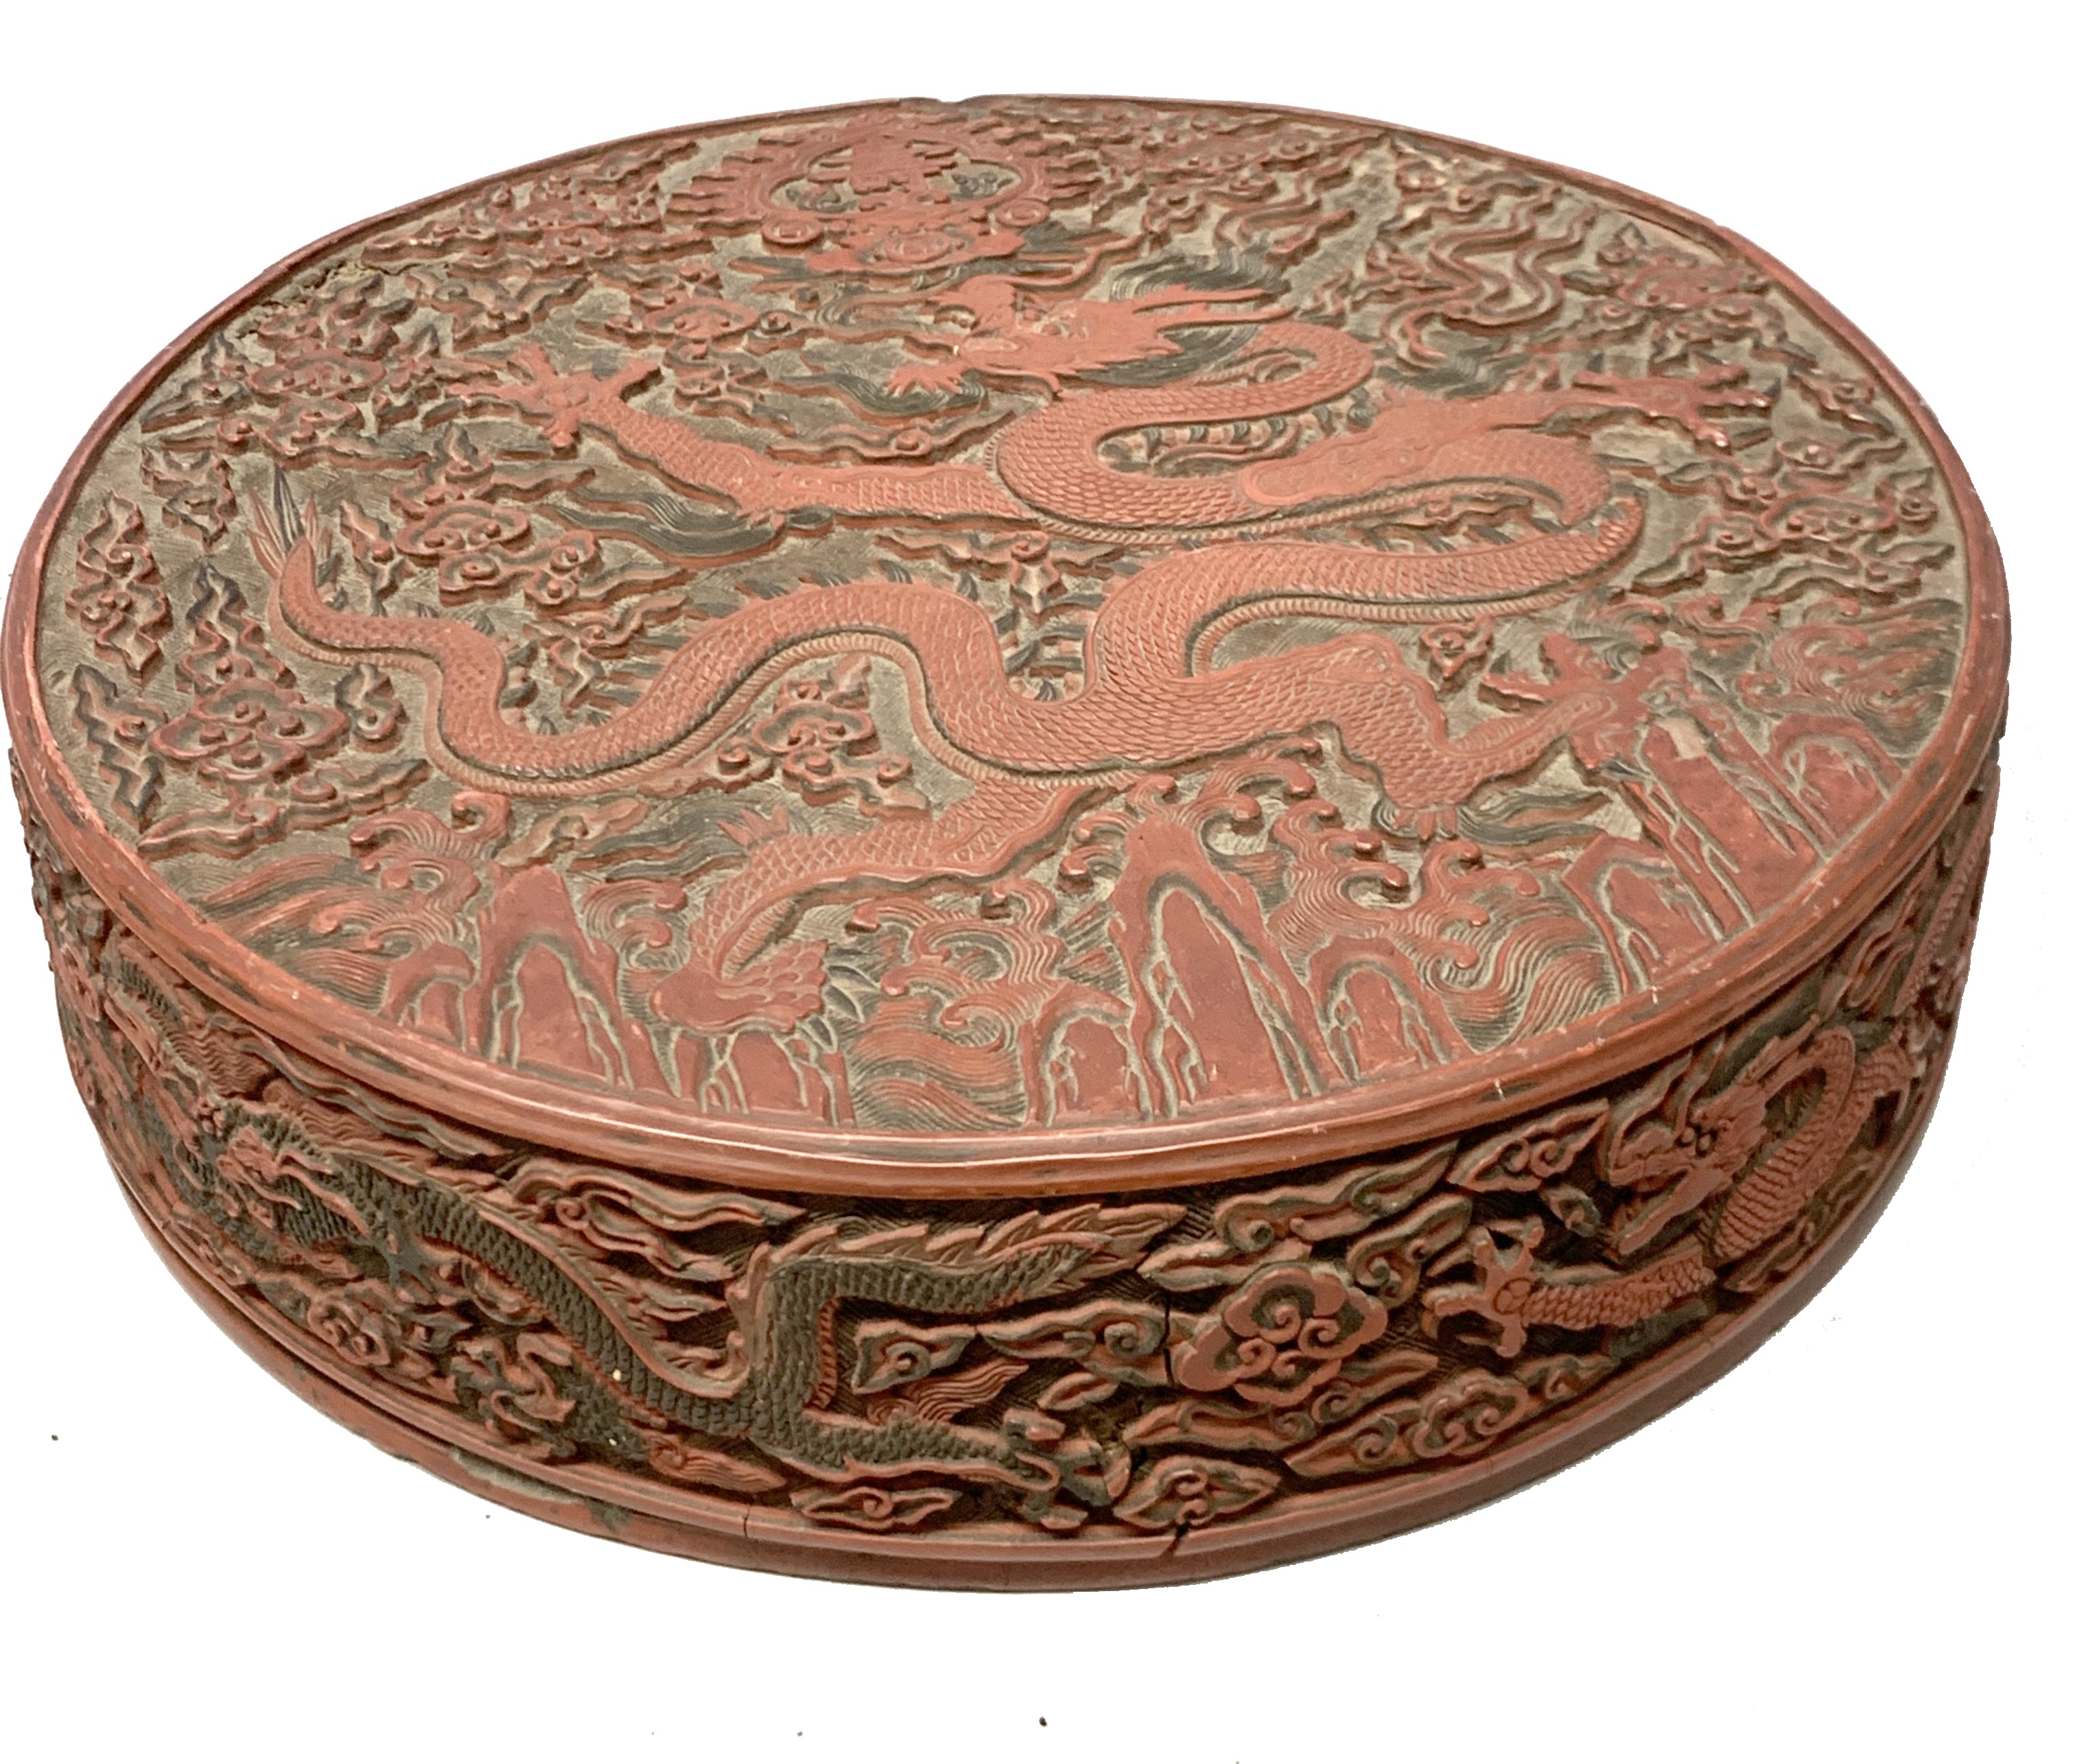 Chinese Bidding War Sees Small Box Sell For £63,000 In Norfolk Auction